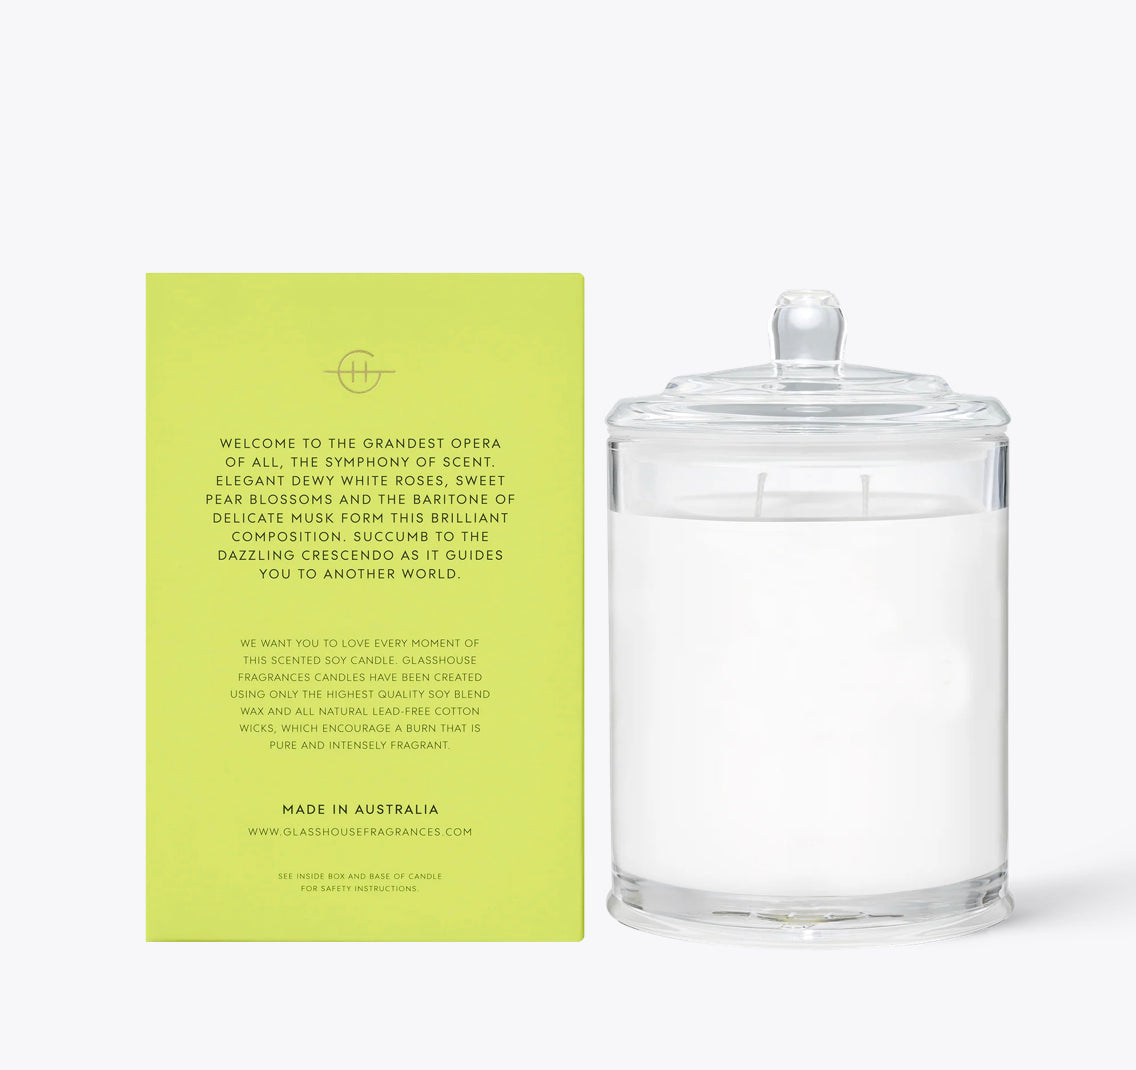 Candle - GH - Flower Symphony (Wild Rose + Pear Blossom) - 380g